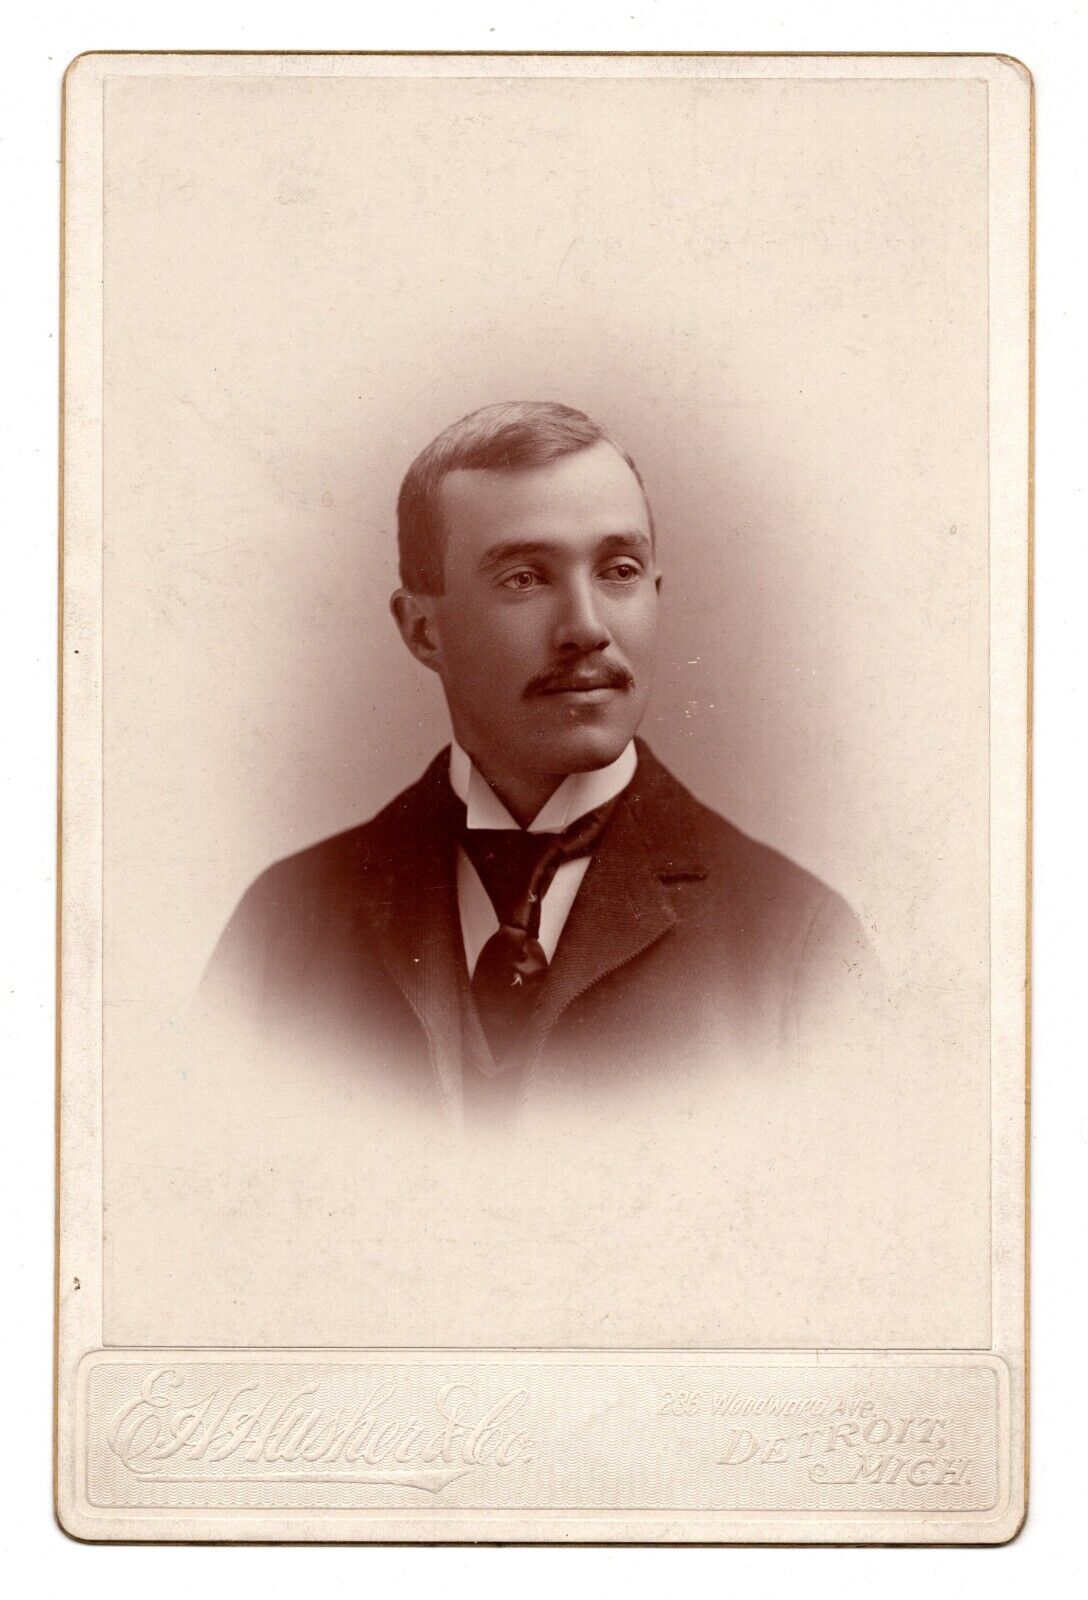 C. 1890s CABINET CARD E.H. HUSHER & CO HANDSOME MAN WITH MUSTACHE DETROIT MICH.